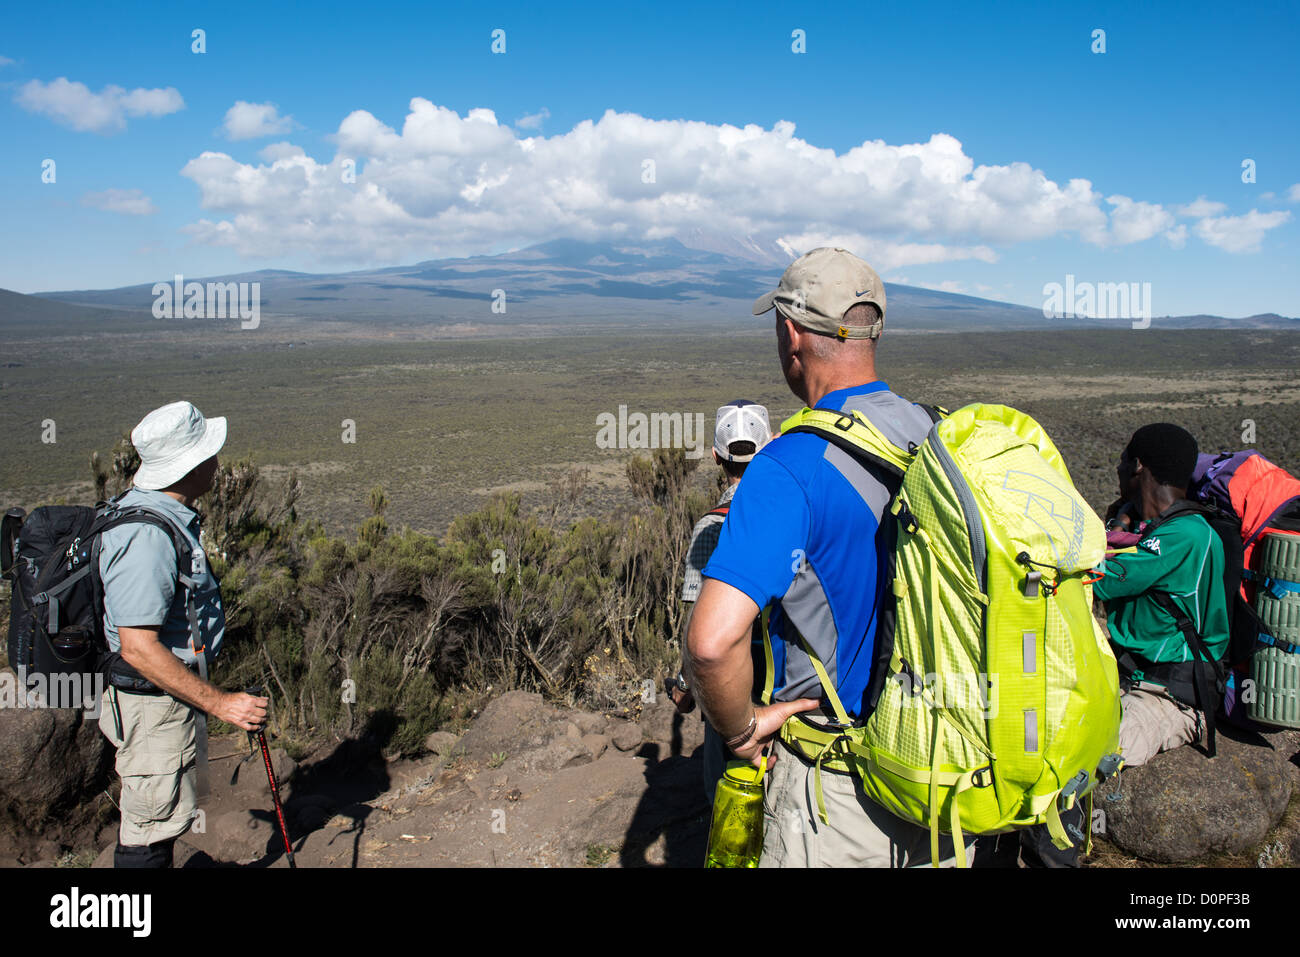 MT KILIMANJARO, Tanzania - Hikers in the heath zone on Mt Kilimanjaro's Lemosho Trail with the peak of the mountain far in the distance partly obscured by clouds. Stock Photo